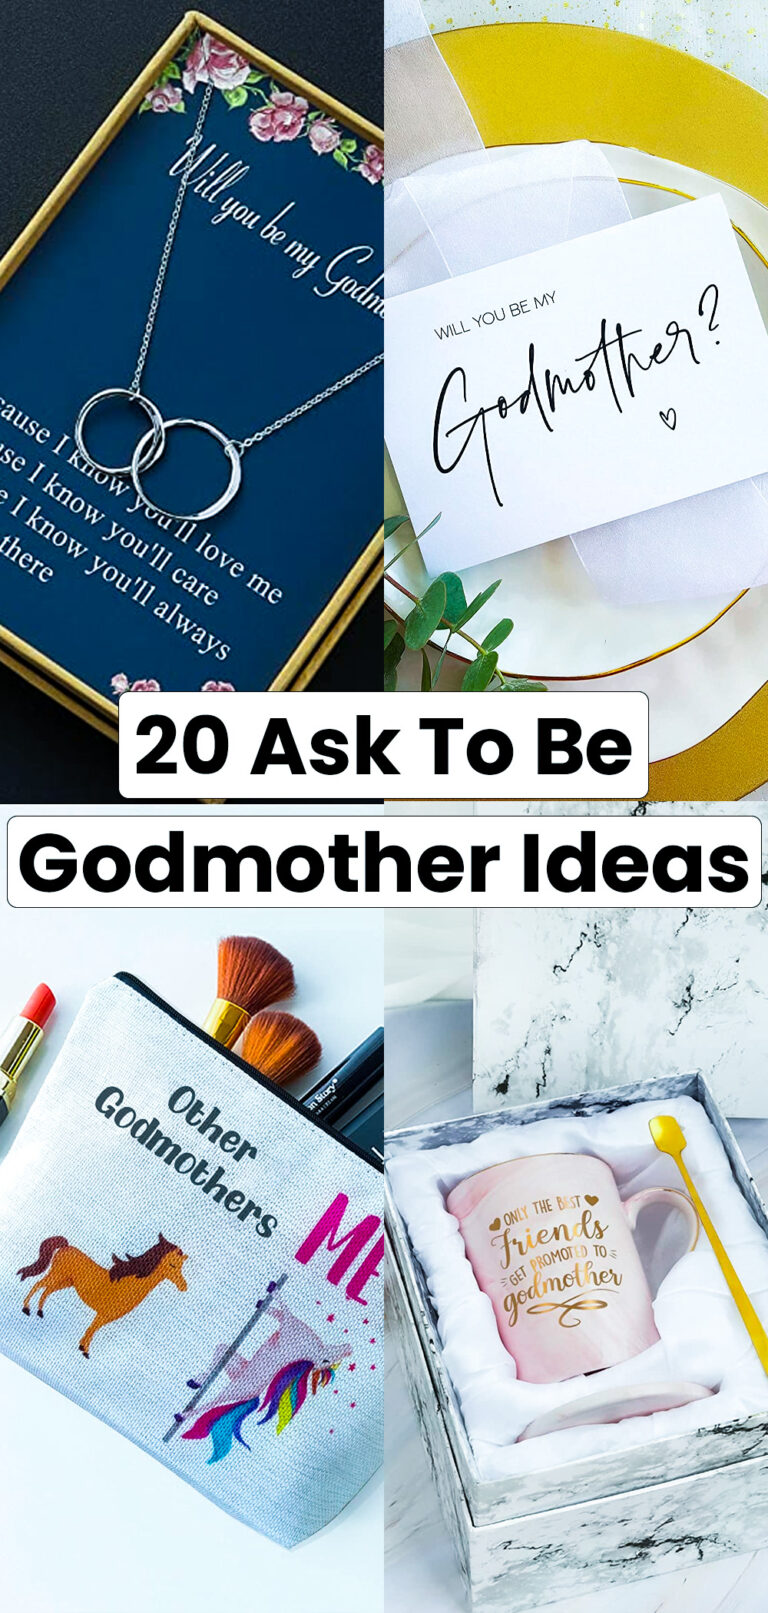 18 Ask to Be Godmother Ideas